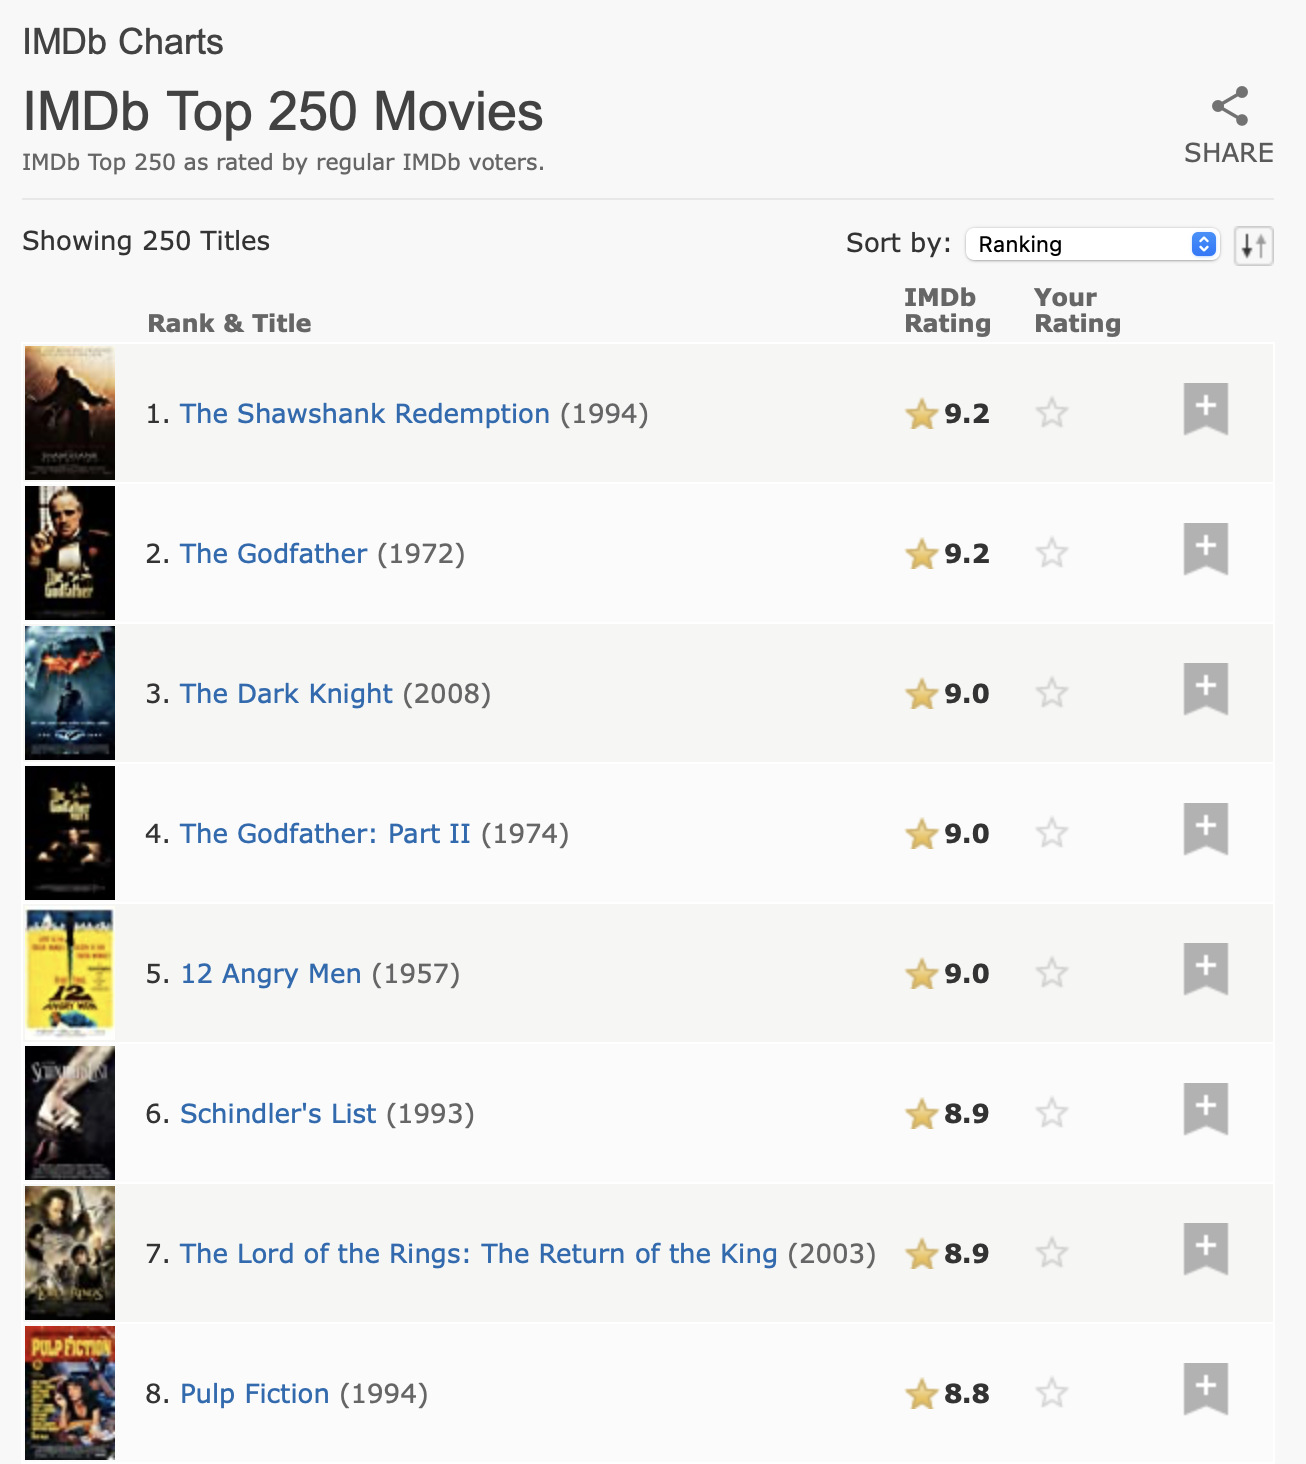 The screenshot shows a table with columns "Rank and Title", "IMDb Rating", and "Your Rating". 9 movies out of the top 250 are shown. The top 5 are the Shawshank Redemption, The Godfather, The Dark Knight, The Godfather: Part II, and 12 Angry Men.